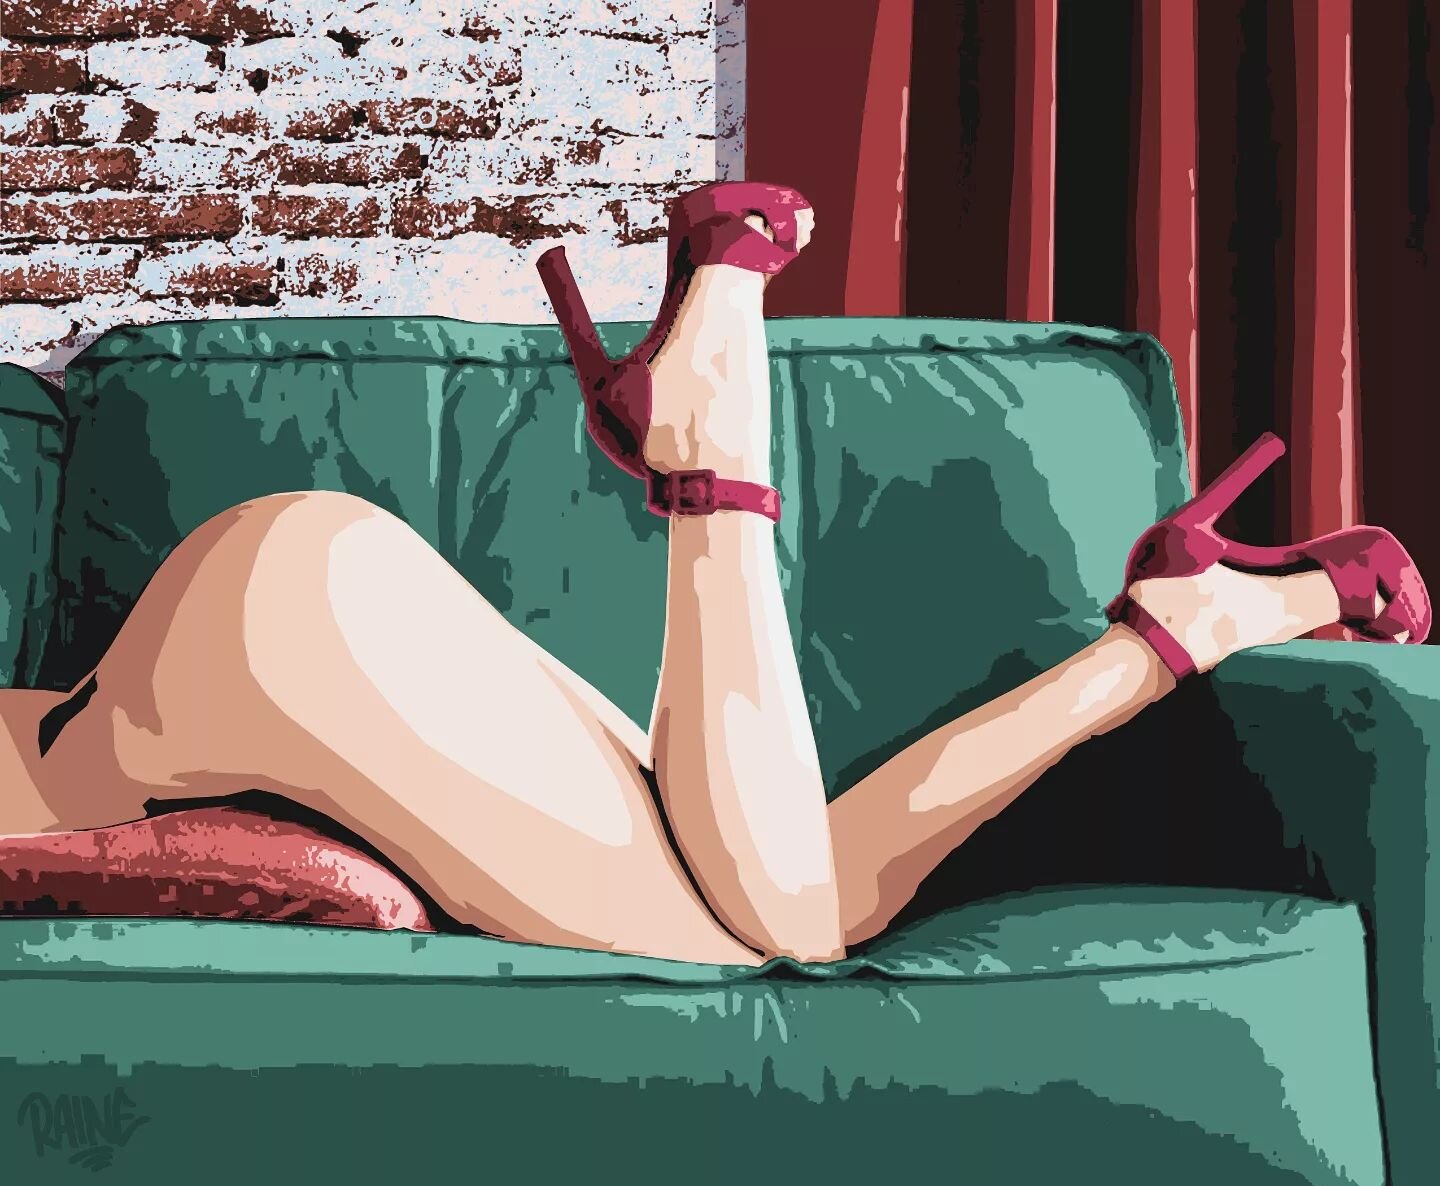 &quot;You said you were leaving?..&quot;
.
Brought to you from another recent photoshoot. Her elegance is the art, I merely captured it.
.
She wishes to remain anonymous..
.
#erotic #eroticart #eroticarts #eroticaesthetic #eroticillustration #erotica